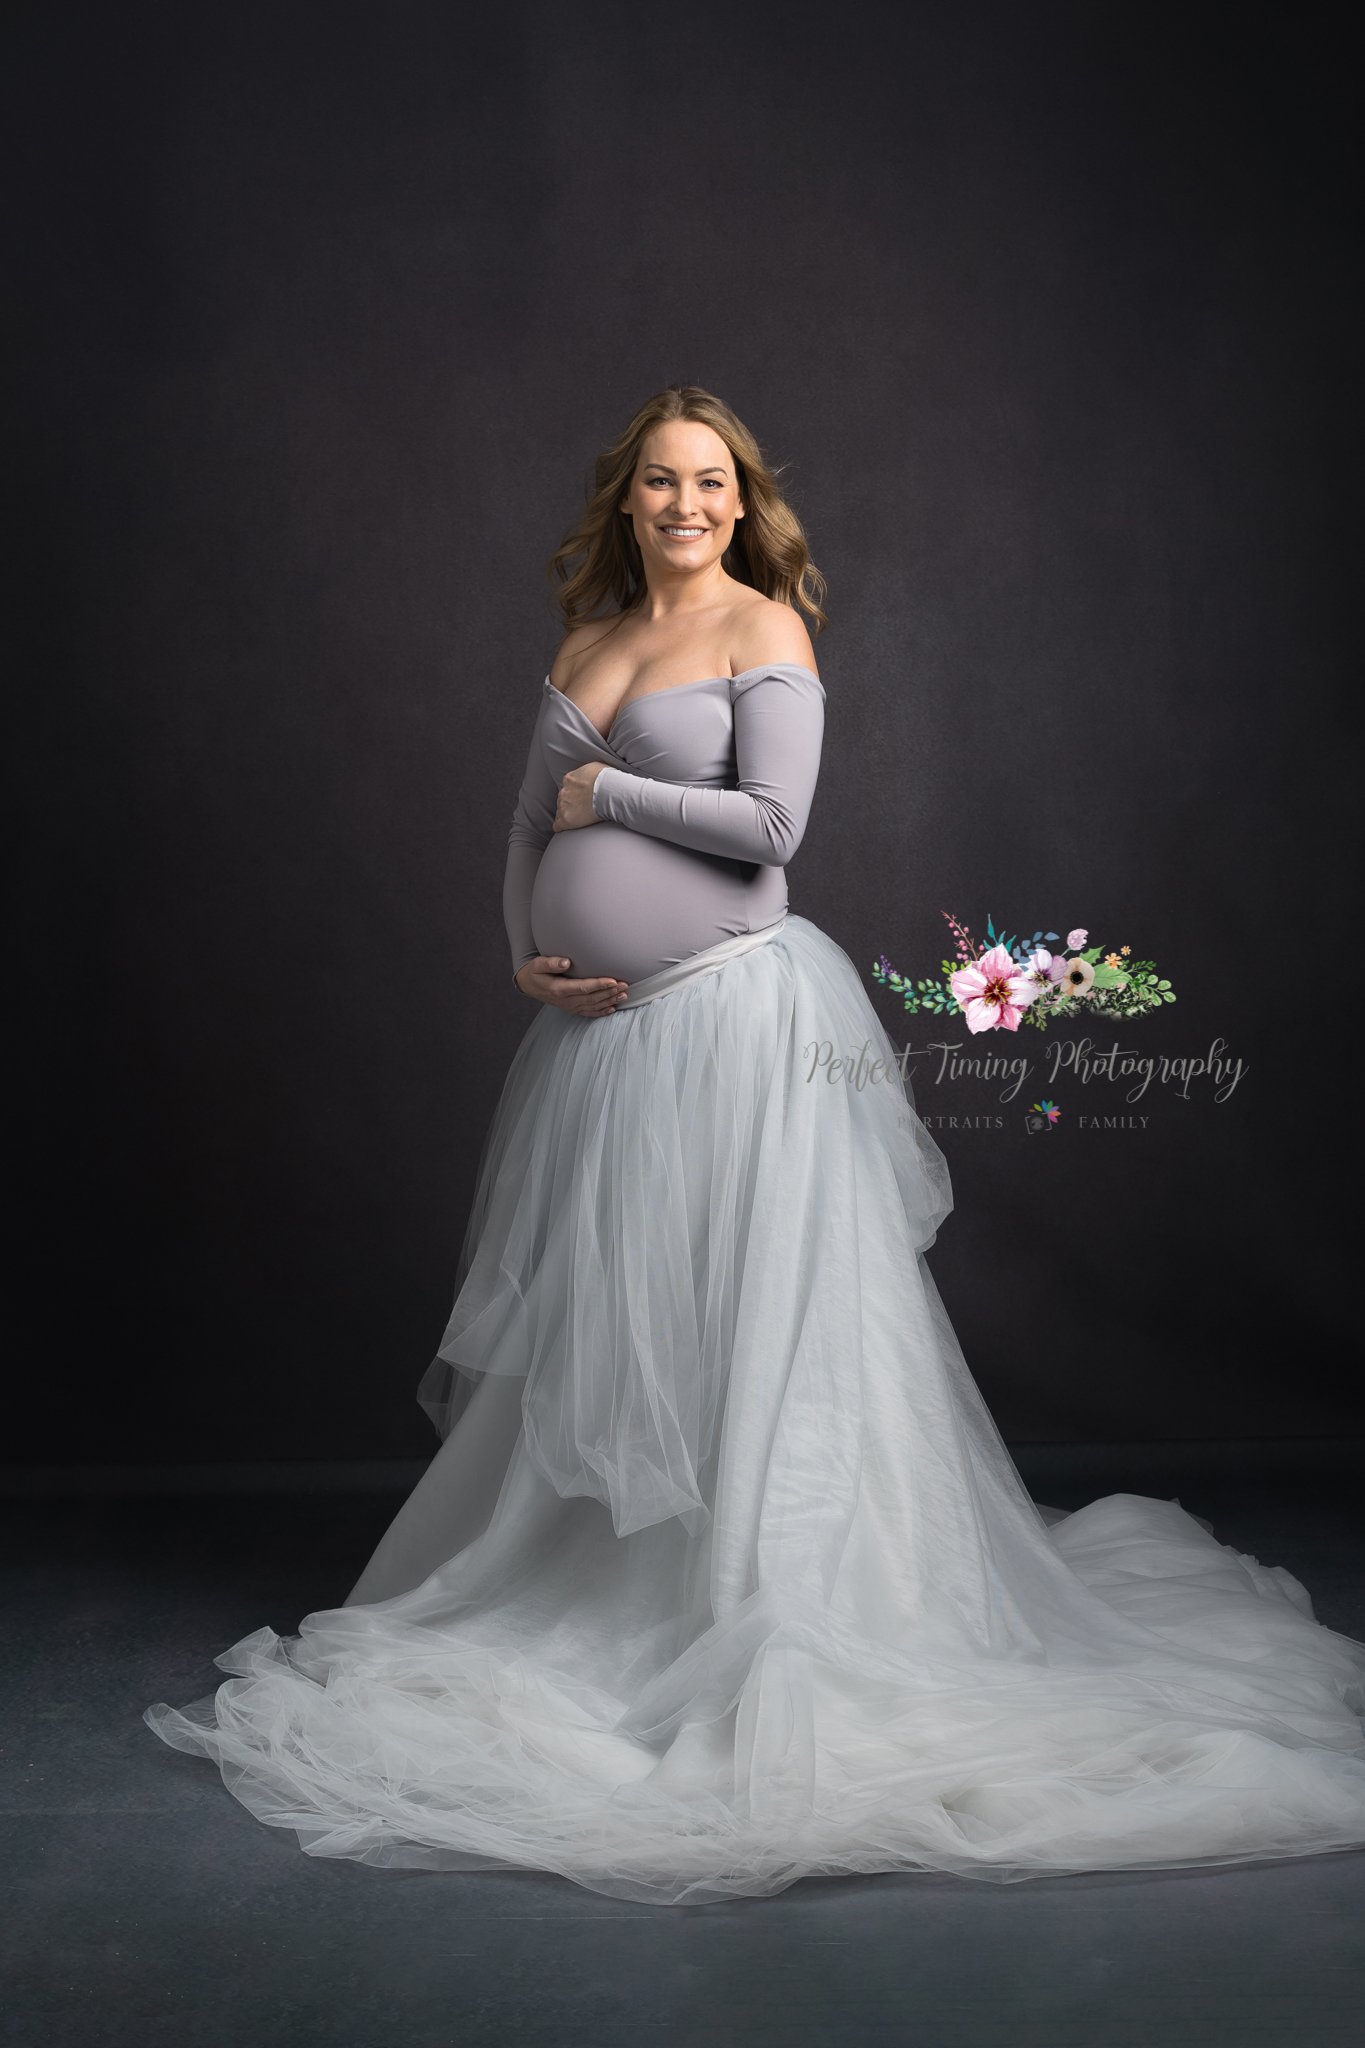 Maternity_Perfect Timing Photography_010.jpg